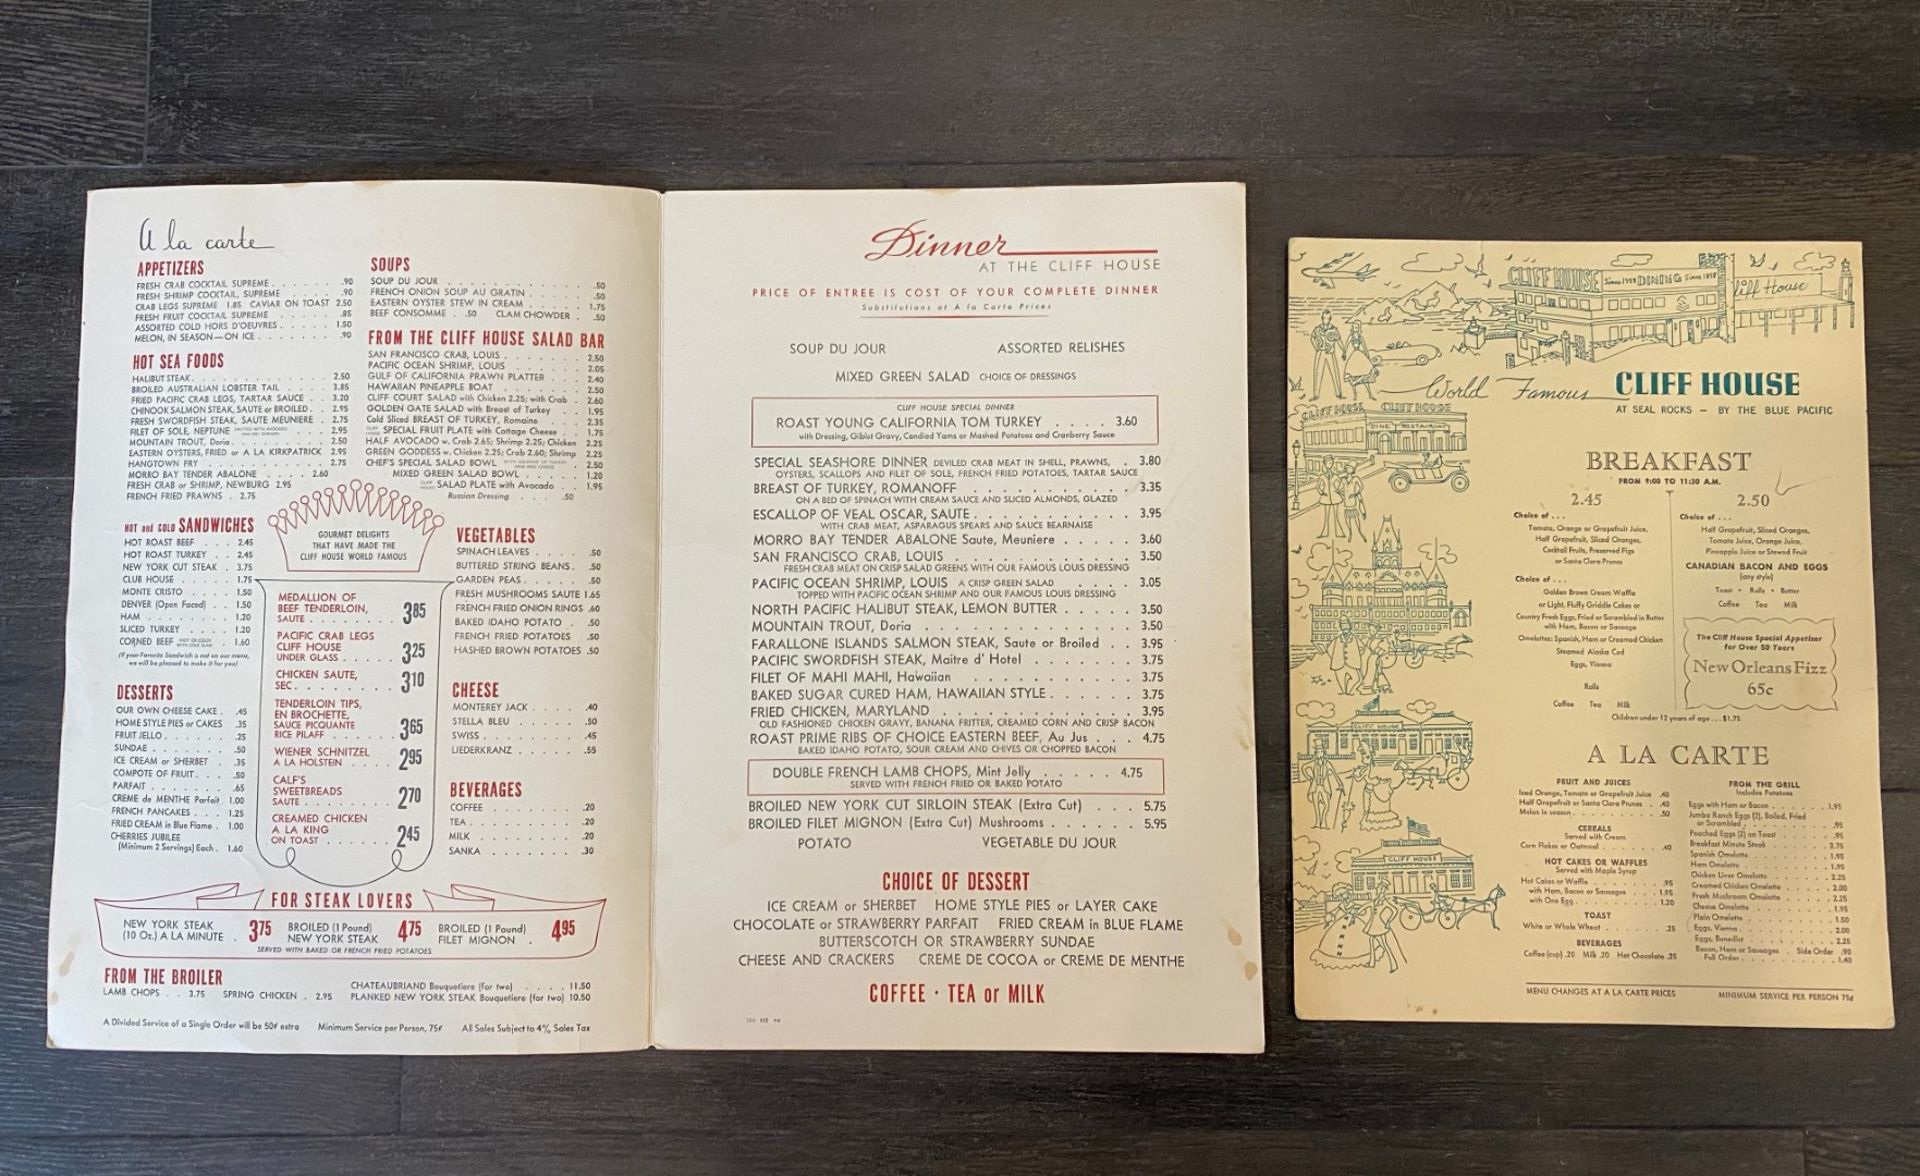 Cliff House Menu - Red - Image 3 of 4